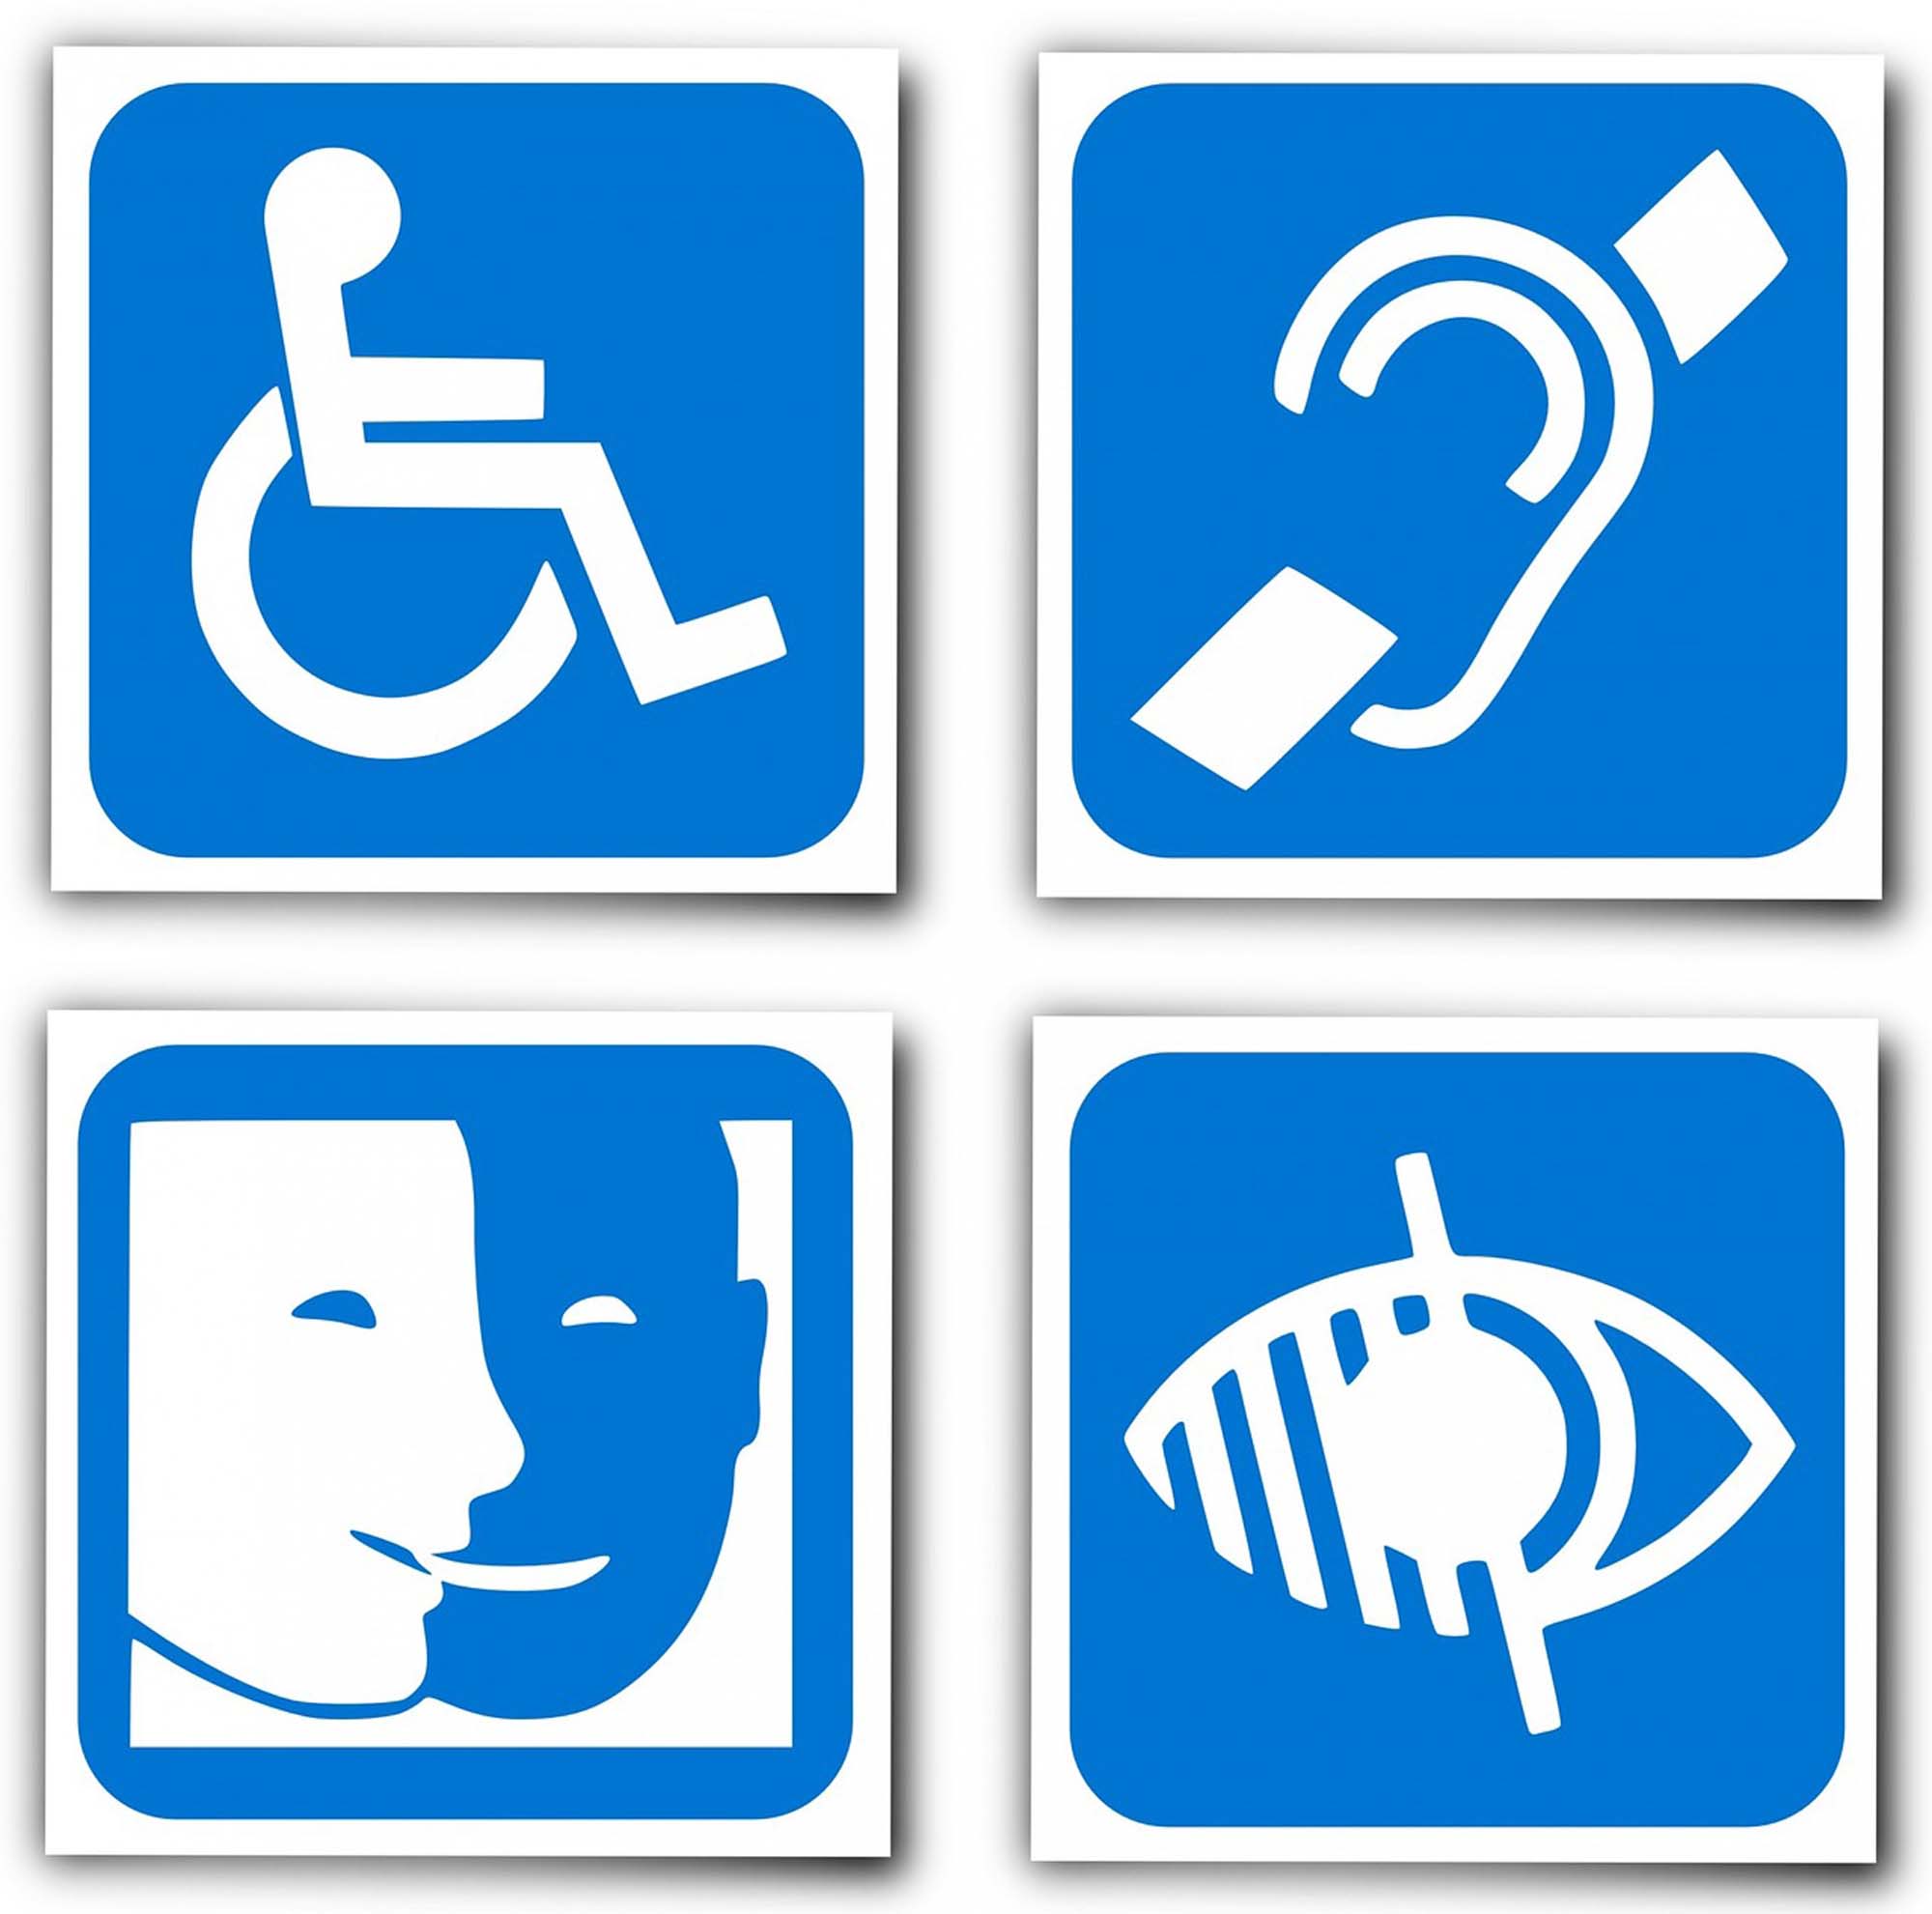 accommodate employees with visual or auditory disabilities